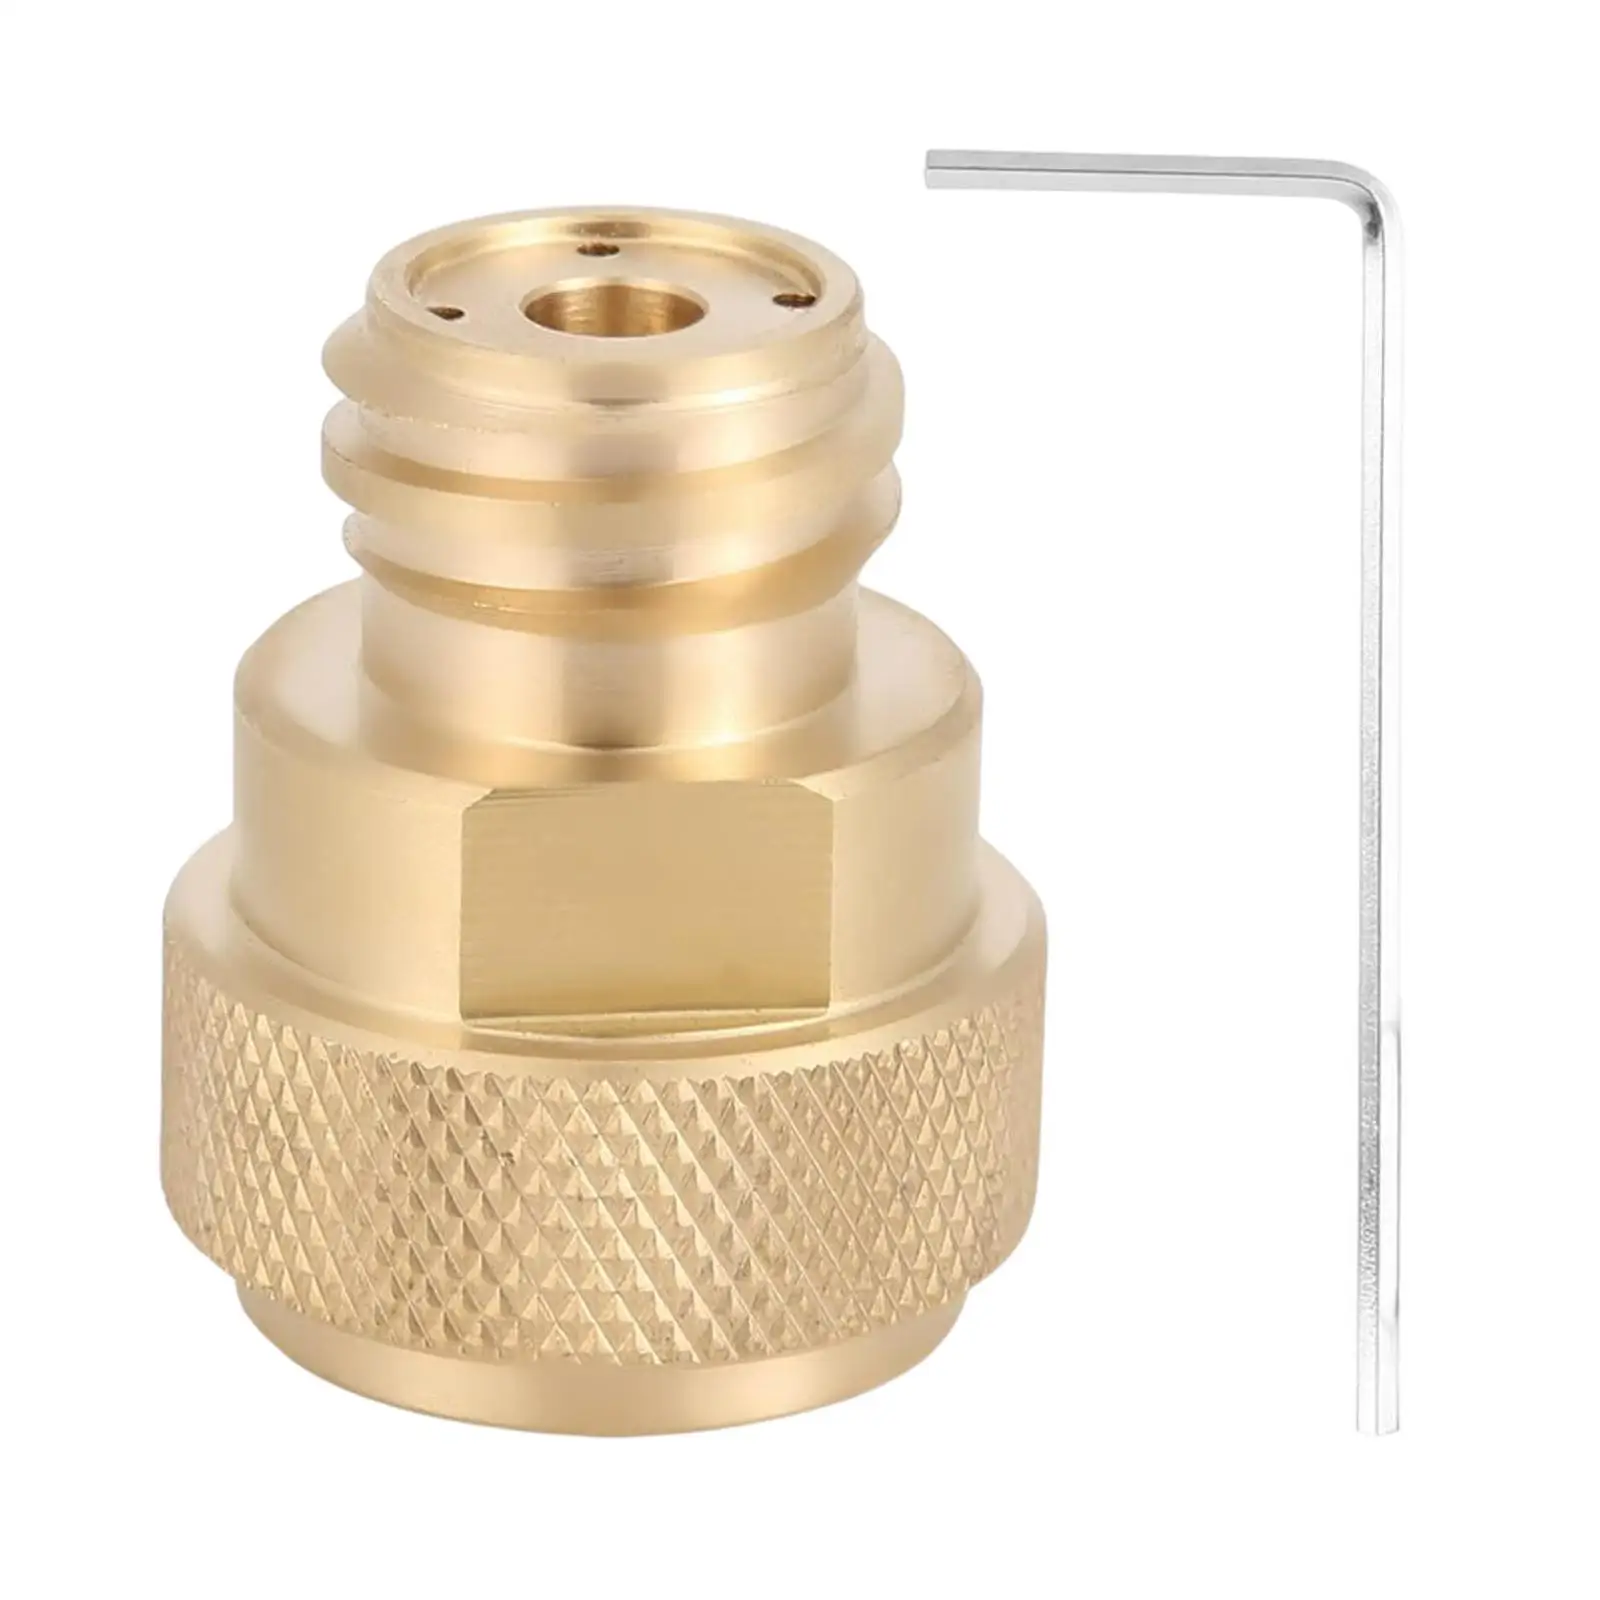 Brass CO2 Converter Adapter Tank Canister Conversion for Soda Machine